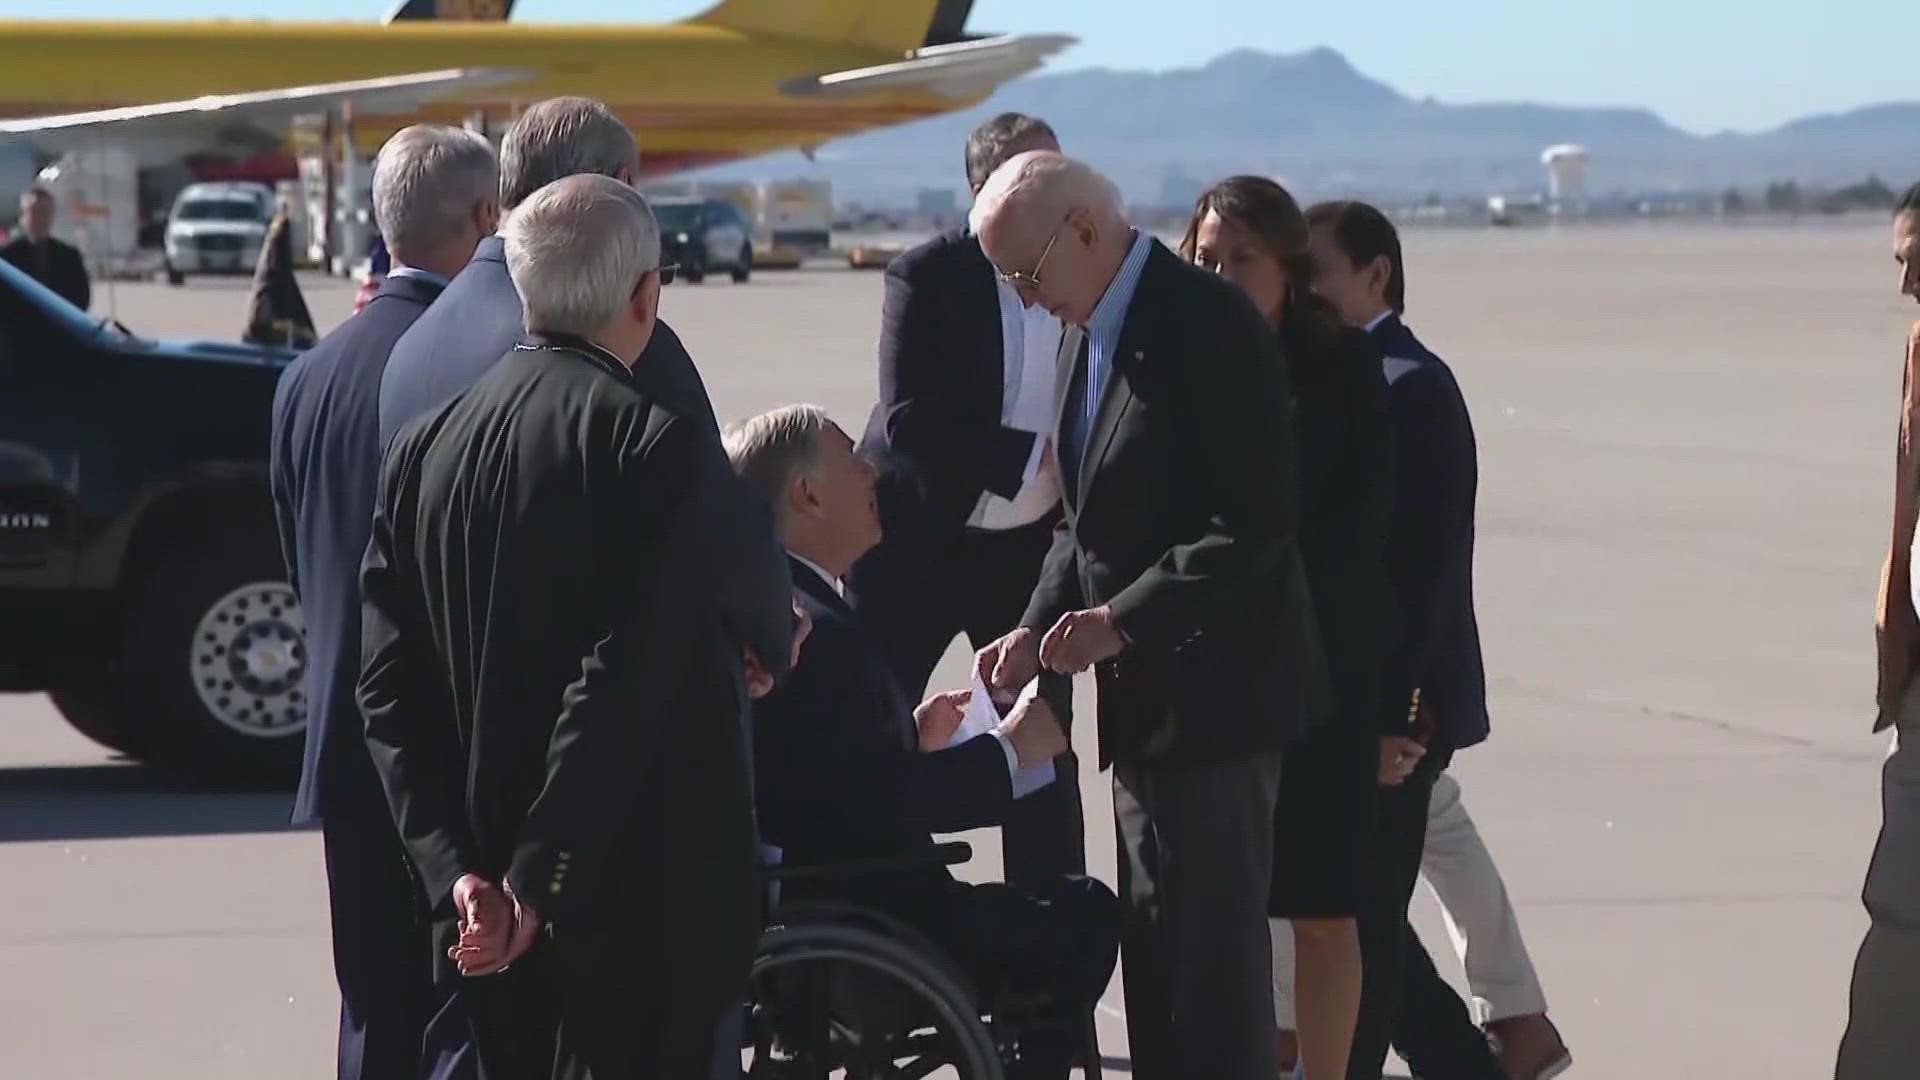 Texas Gov. Greg Abbott met the president after he landed aboard Air Force One and gave him a letter criticizing the president's border policies.